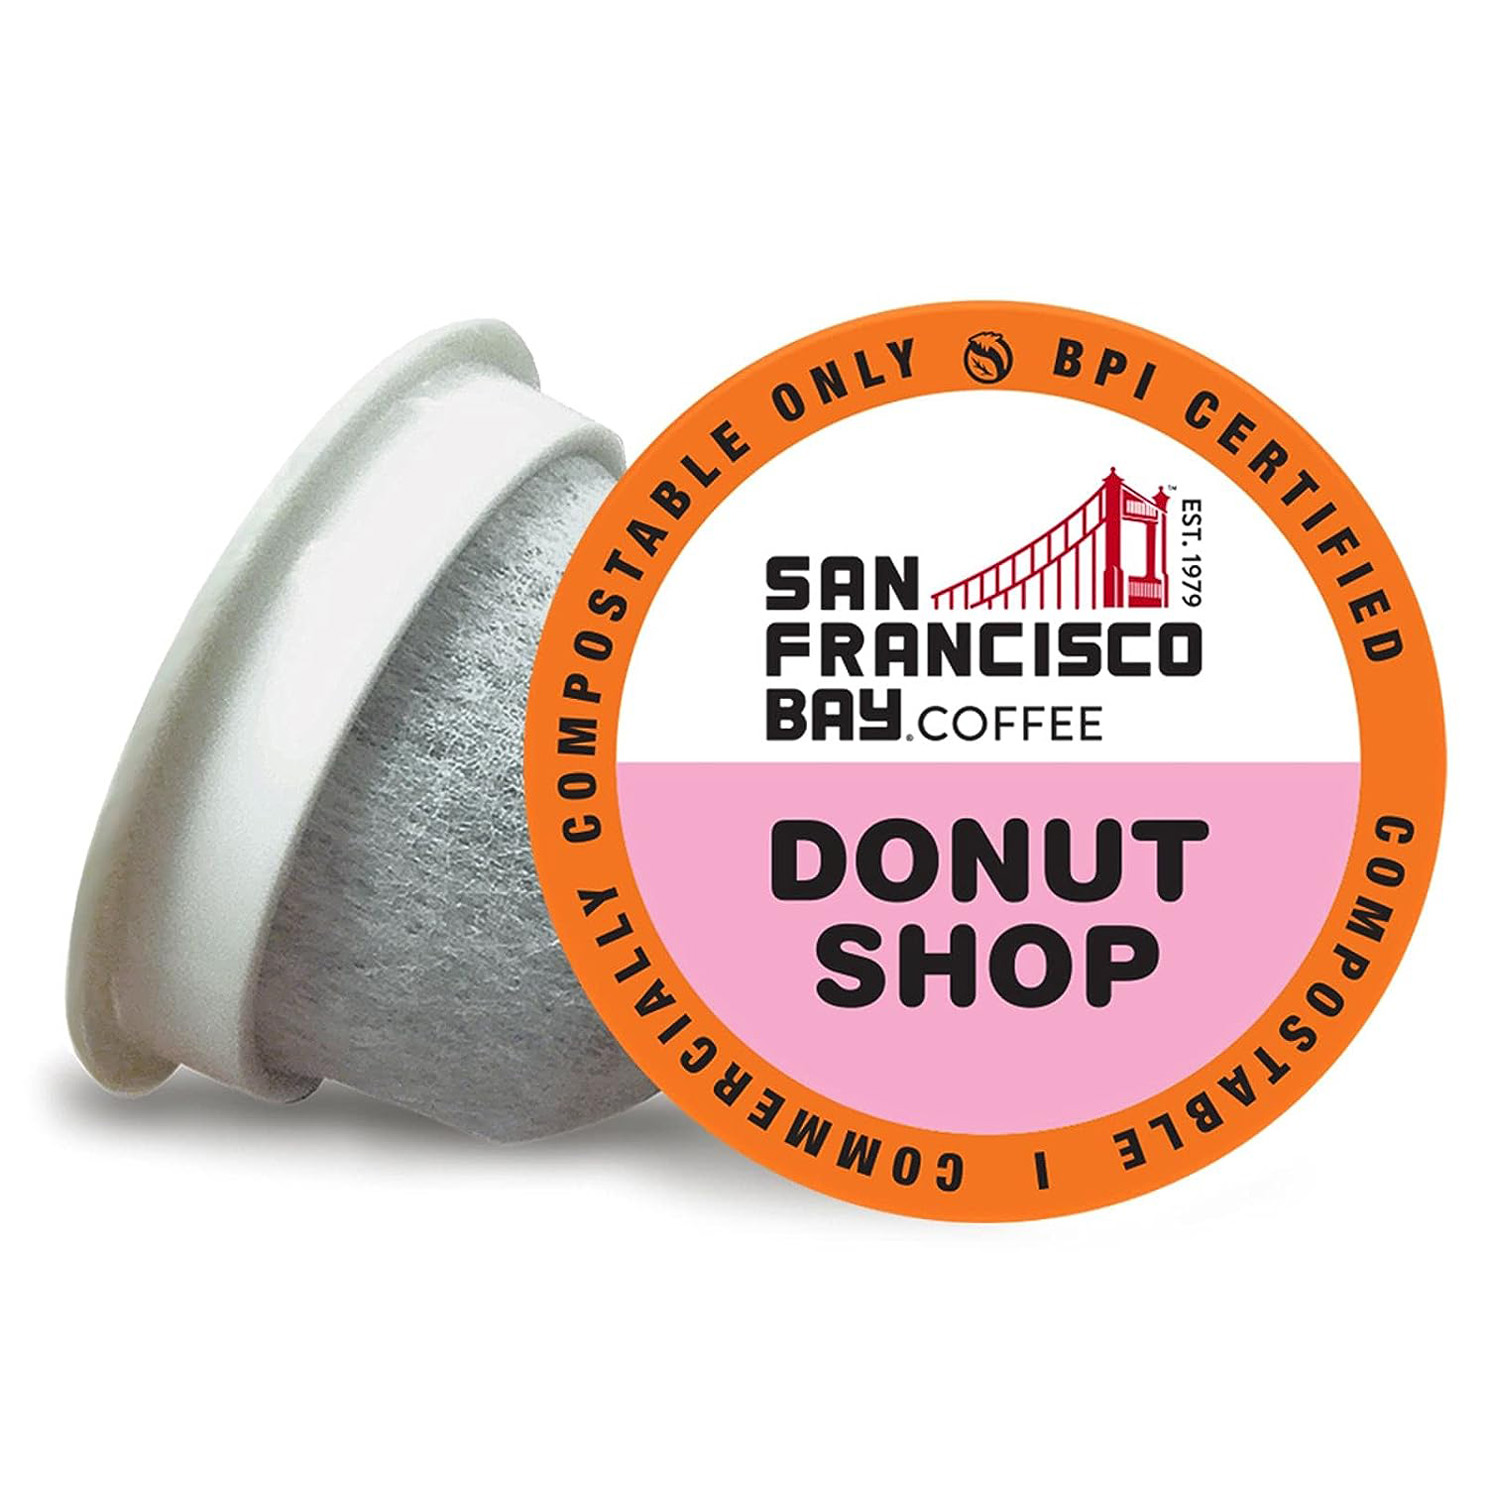 SAN FRANCISCO BAY Coffee Donut Shop 80 Ct Light Roast Compostable Coffee Pods, K Cup Compatible including Keurig 2.0